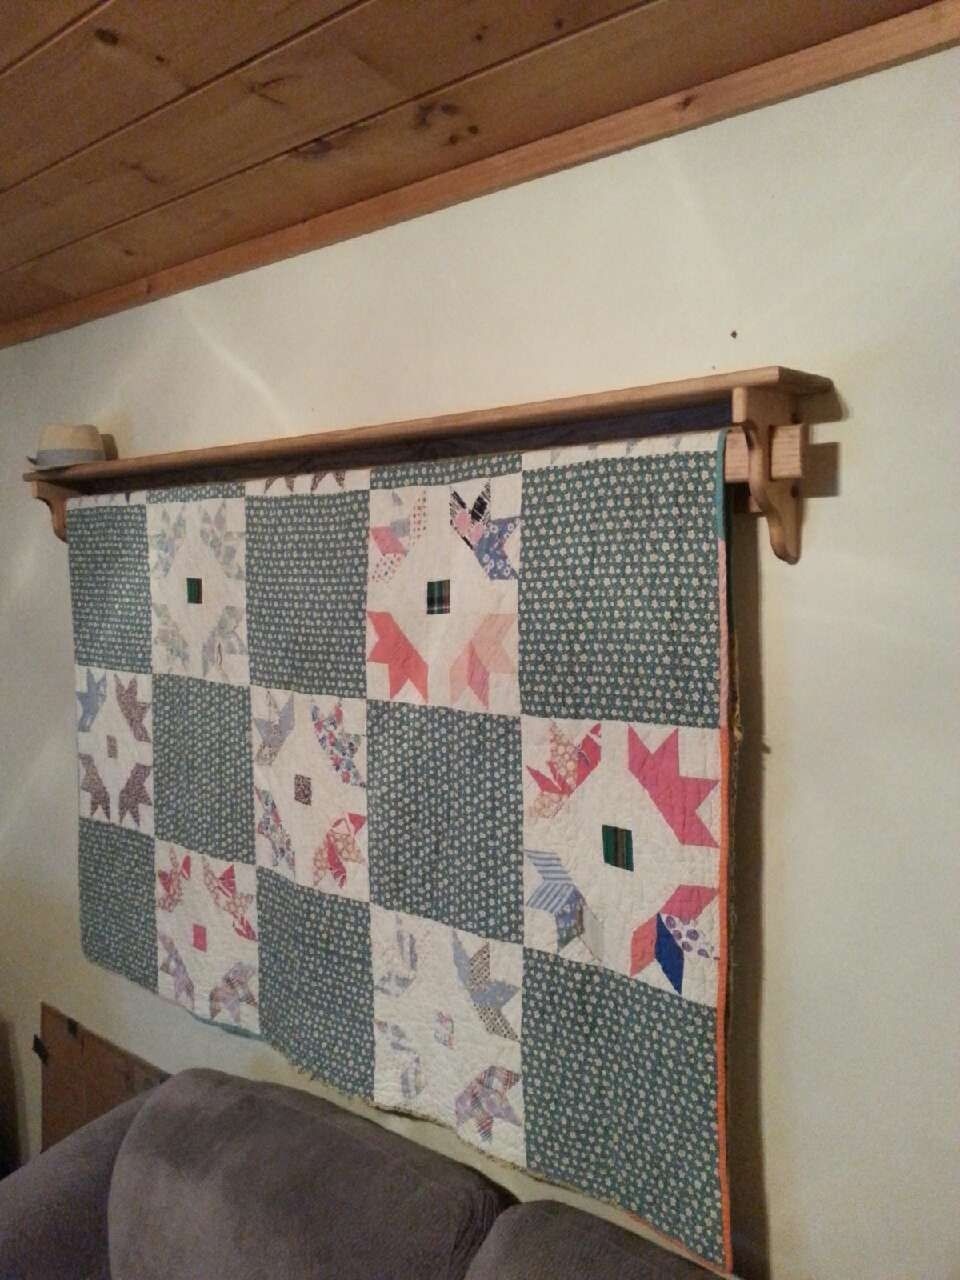 Used 6ft wall mount quilt rack hanger for sale in